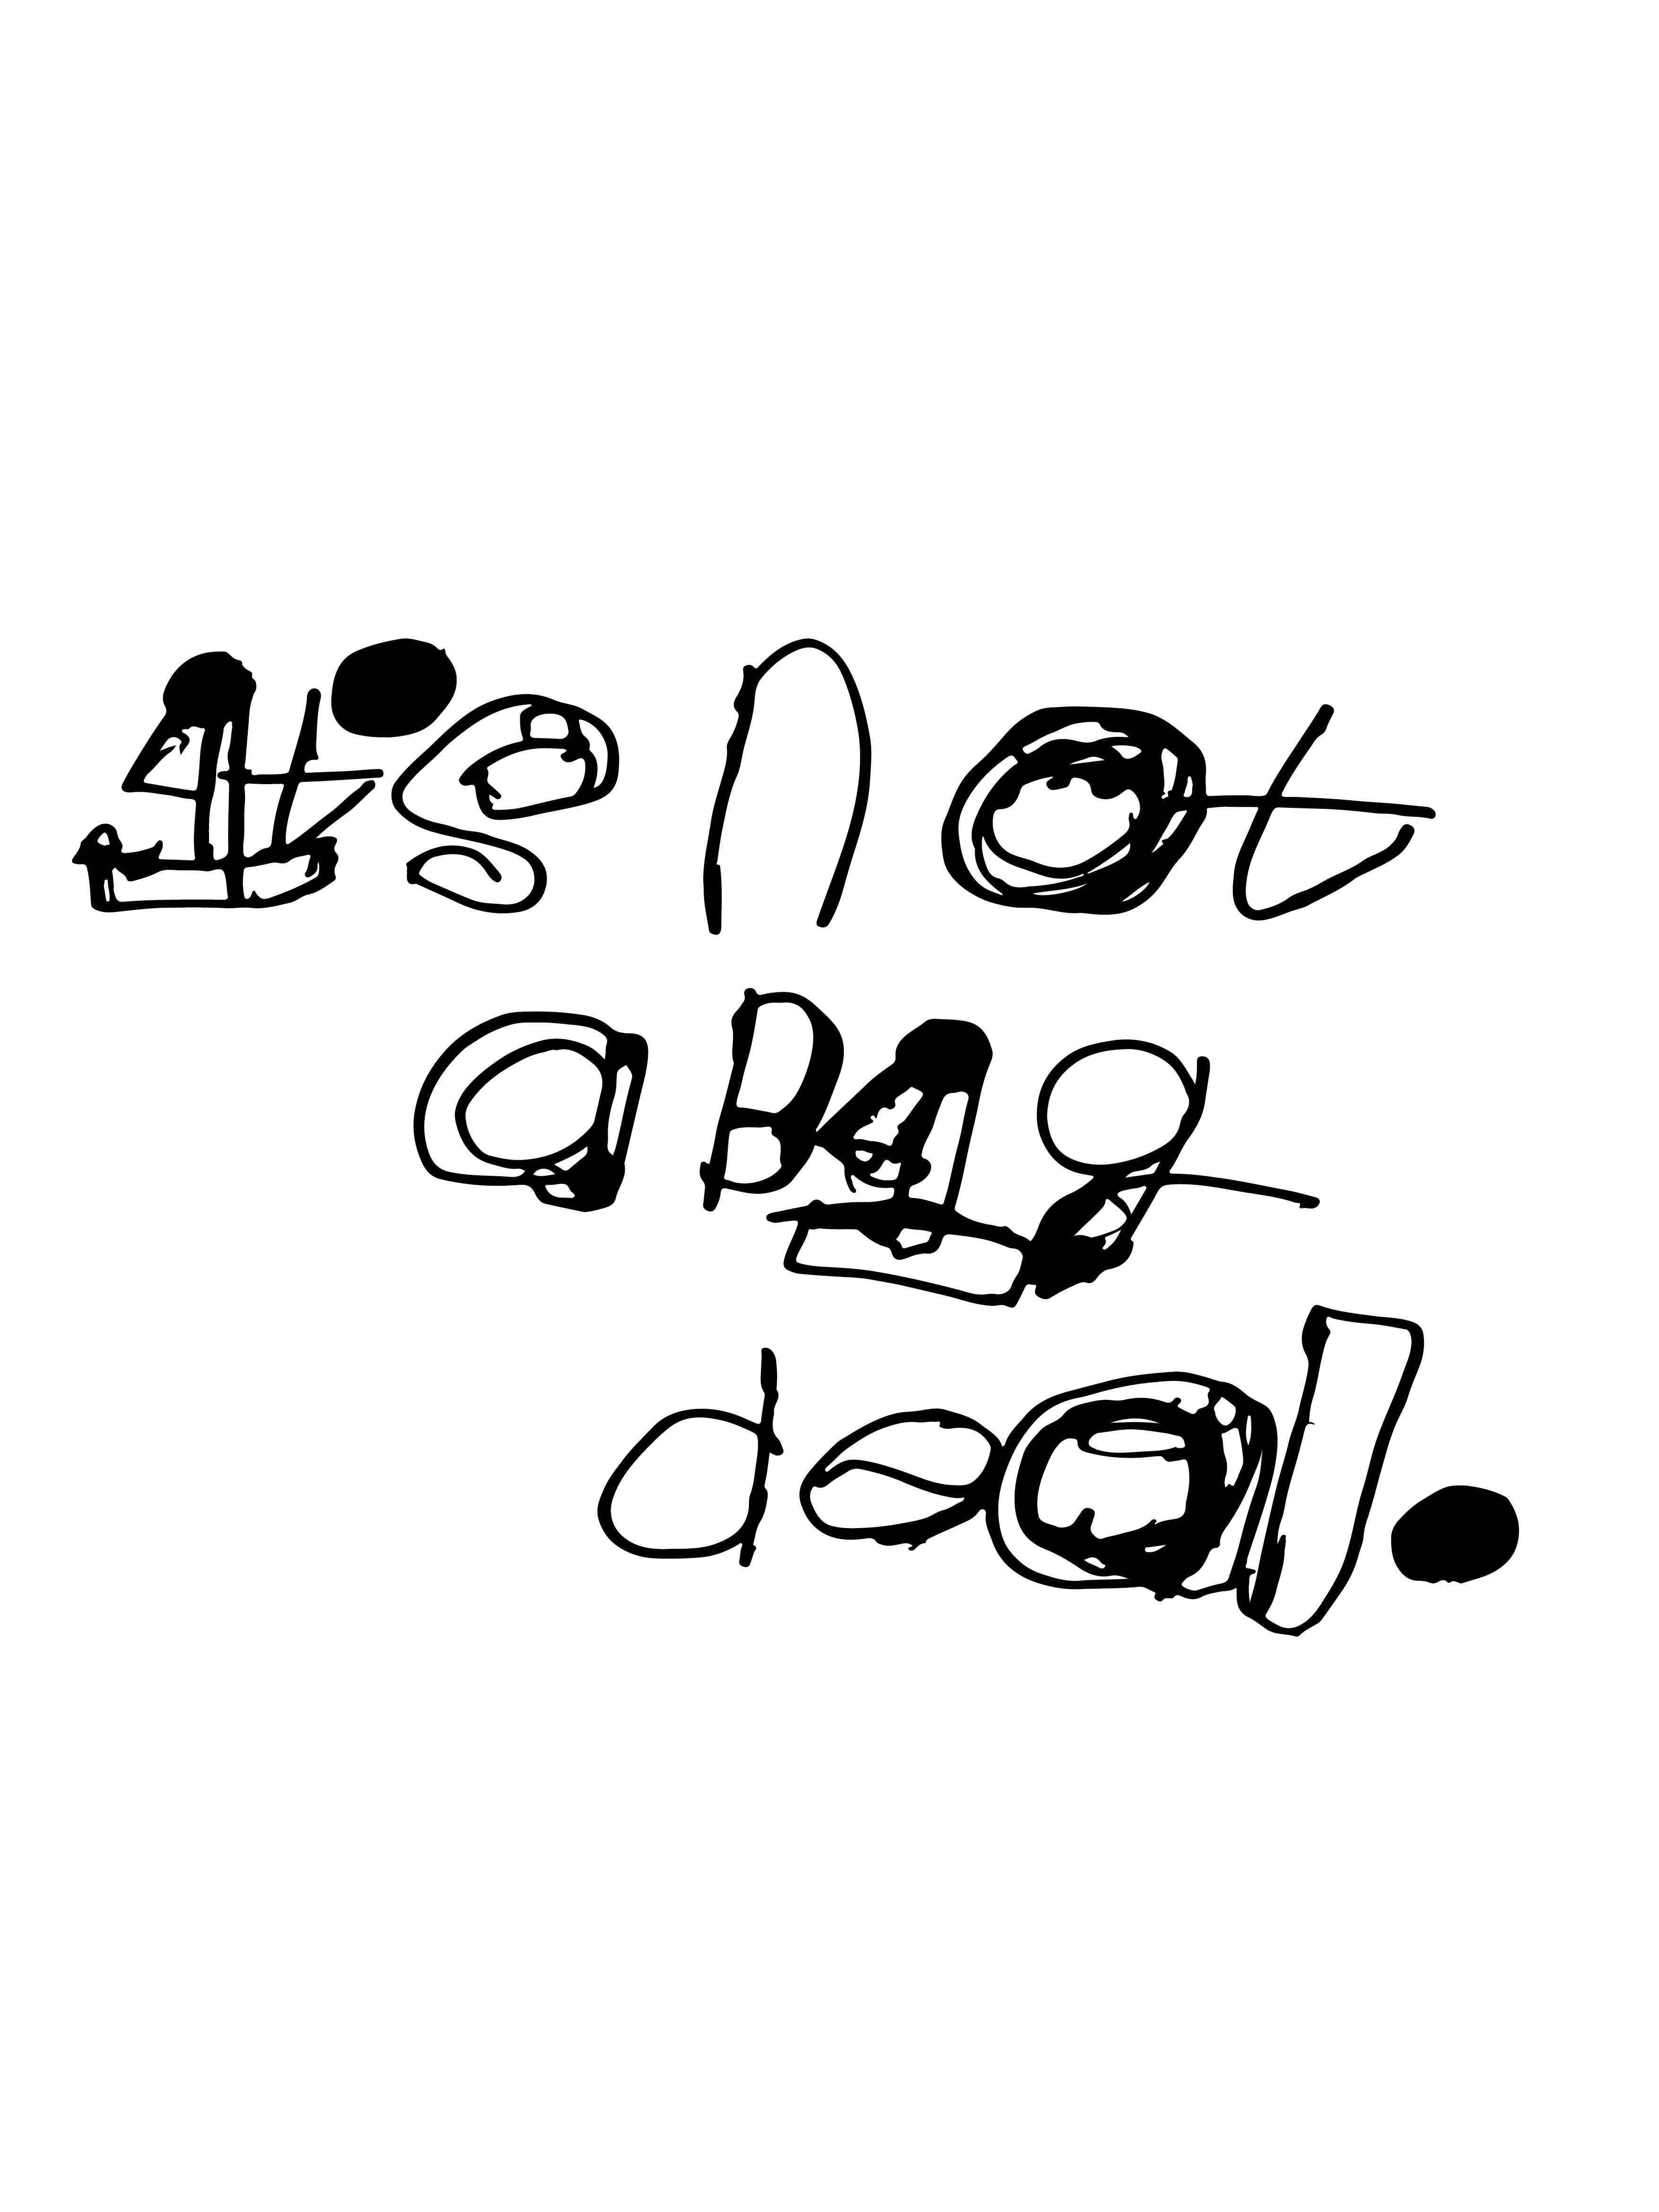 PRINT - IT'S NOT A BIG DEAL by NOTES BY PIPER